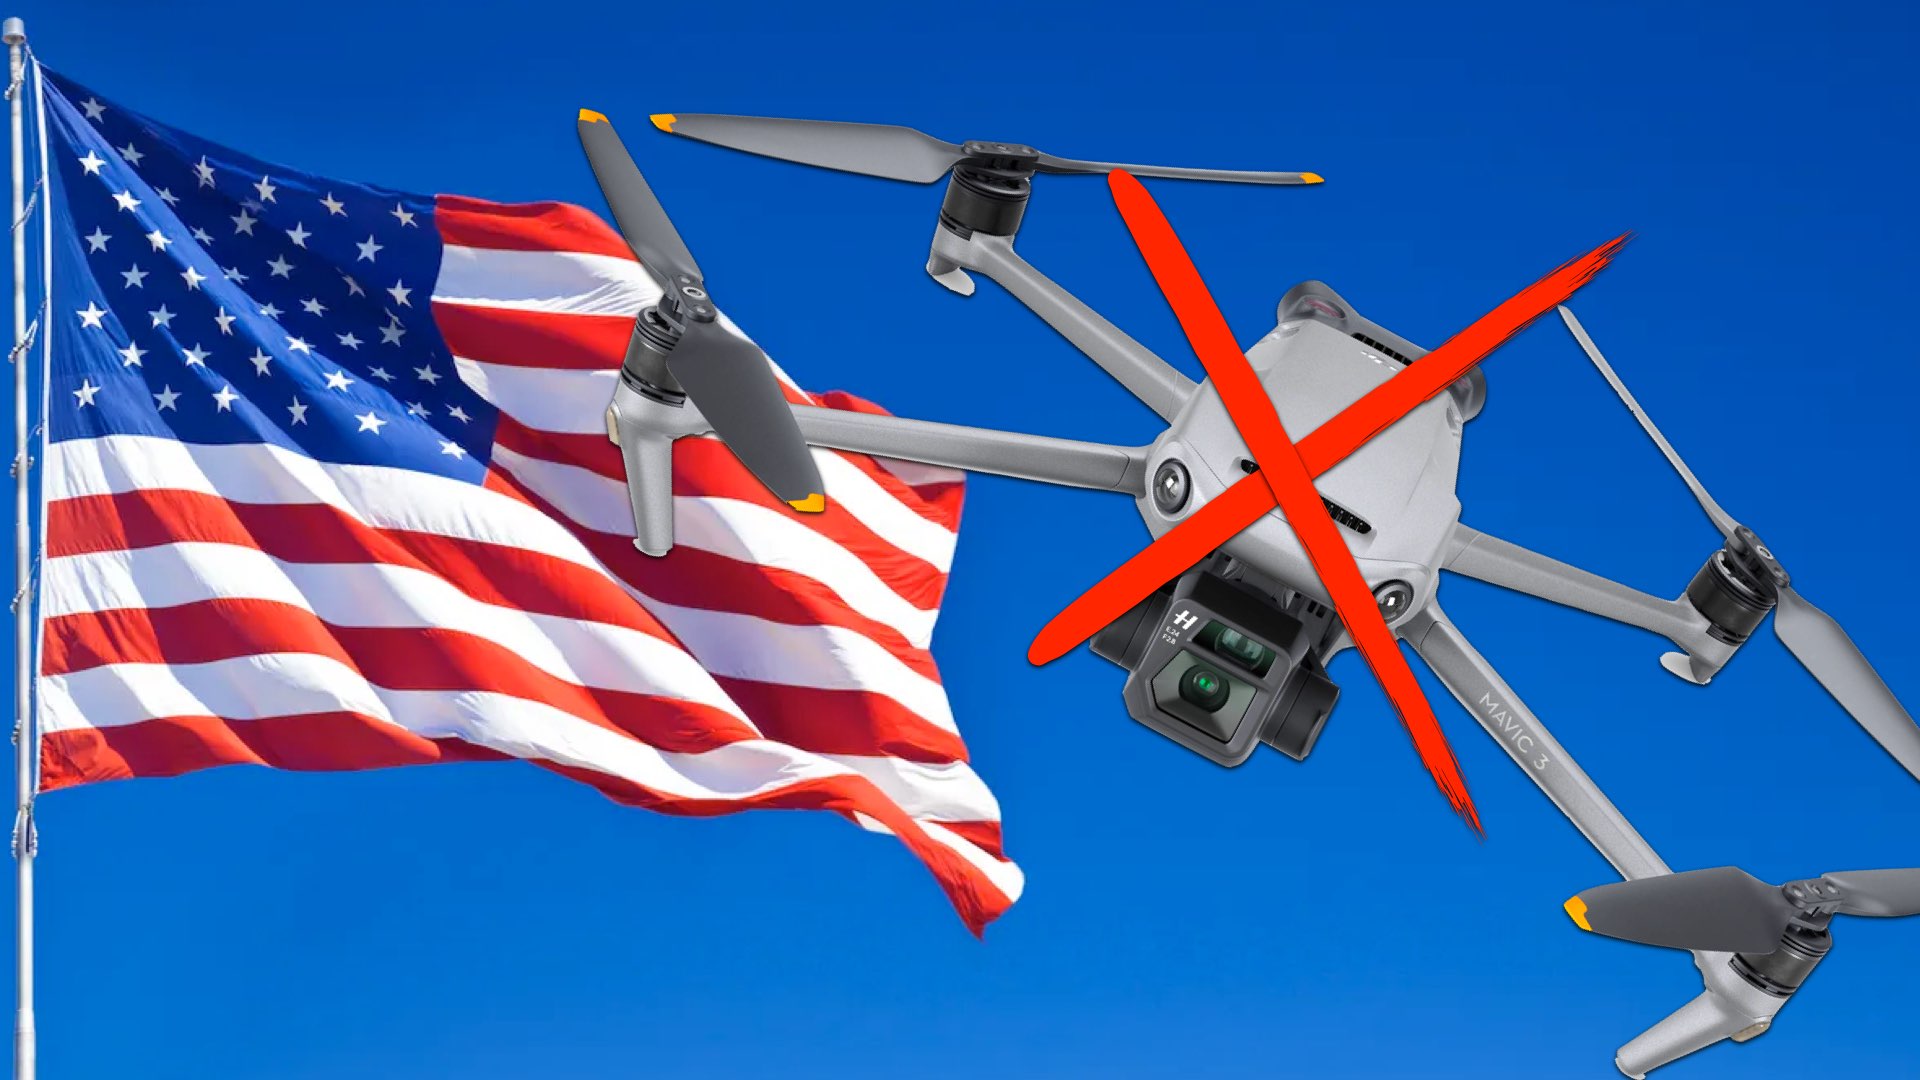 DJI Has Been Blacklisted by the United States